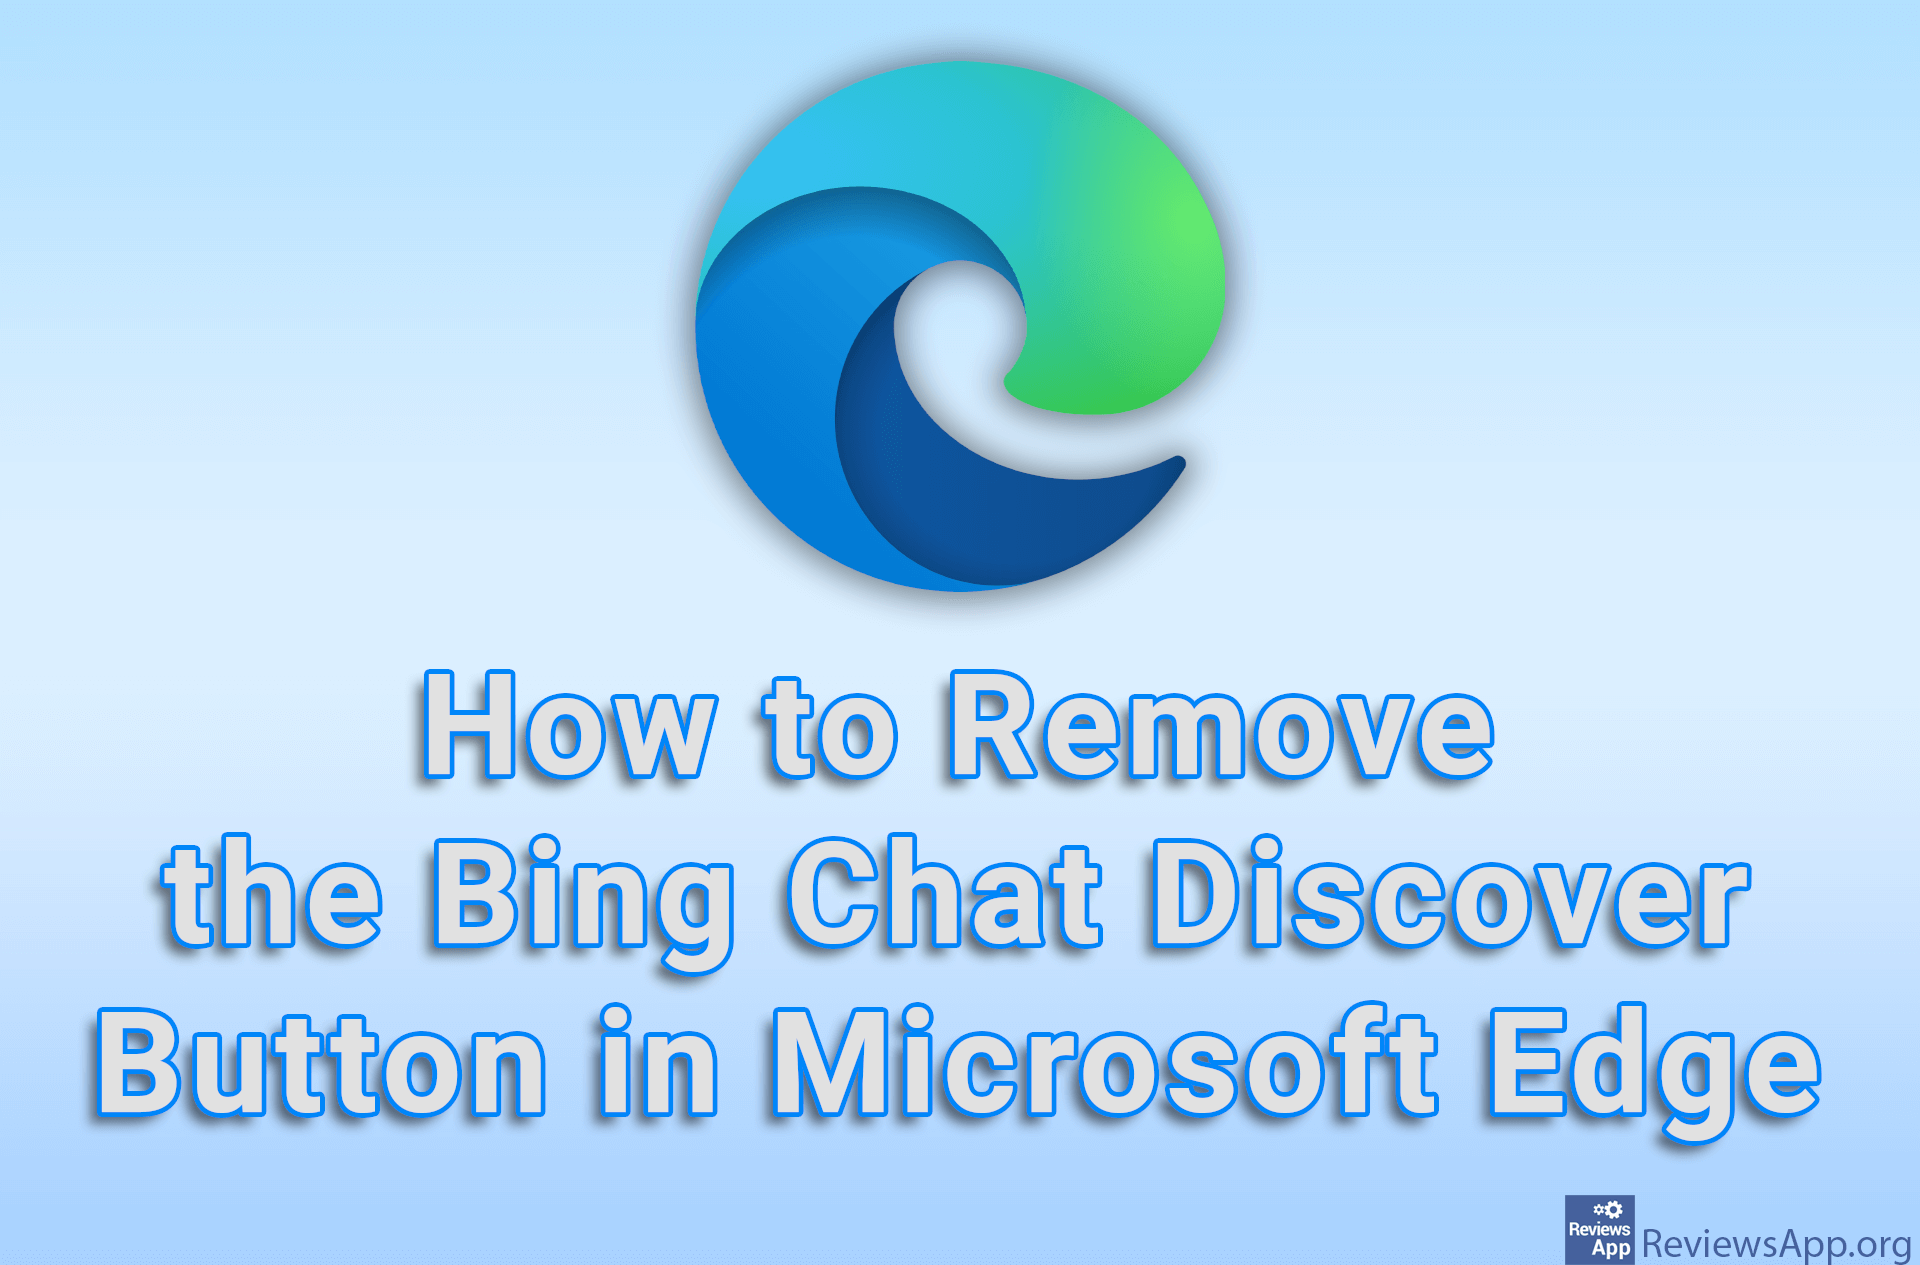 How to Remove the Bing Chat Discover Button in Microsoft Edge